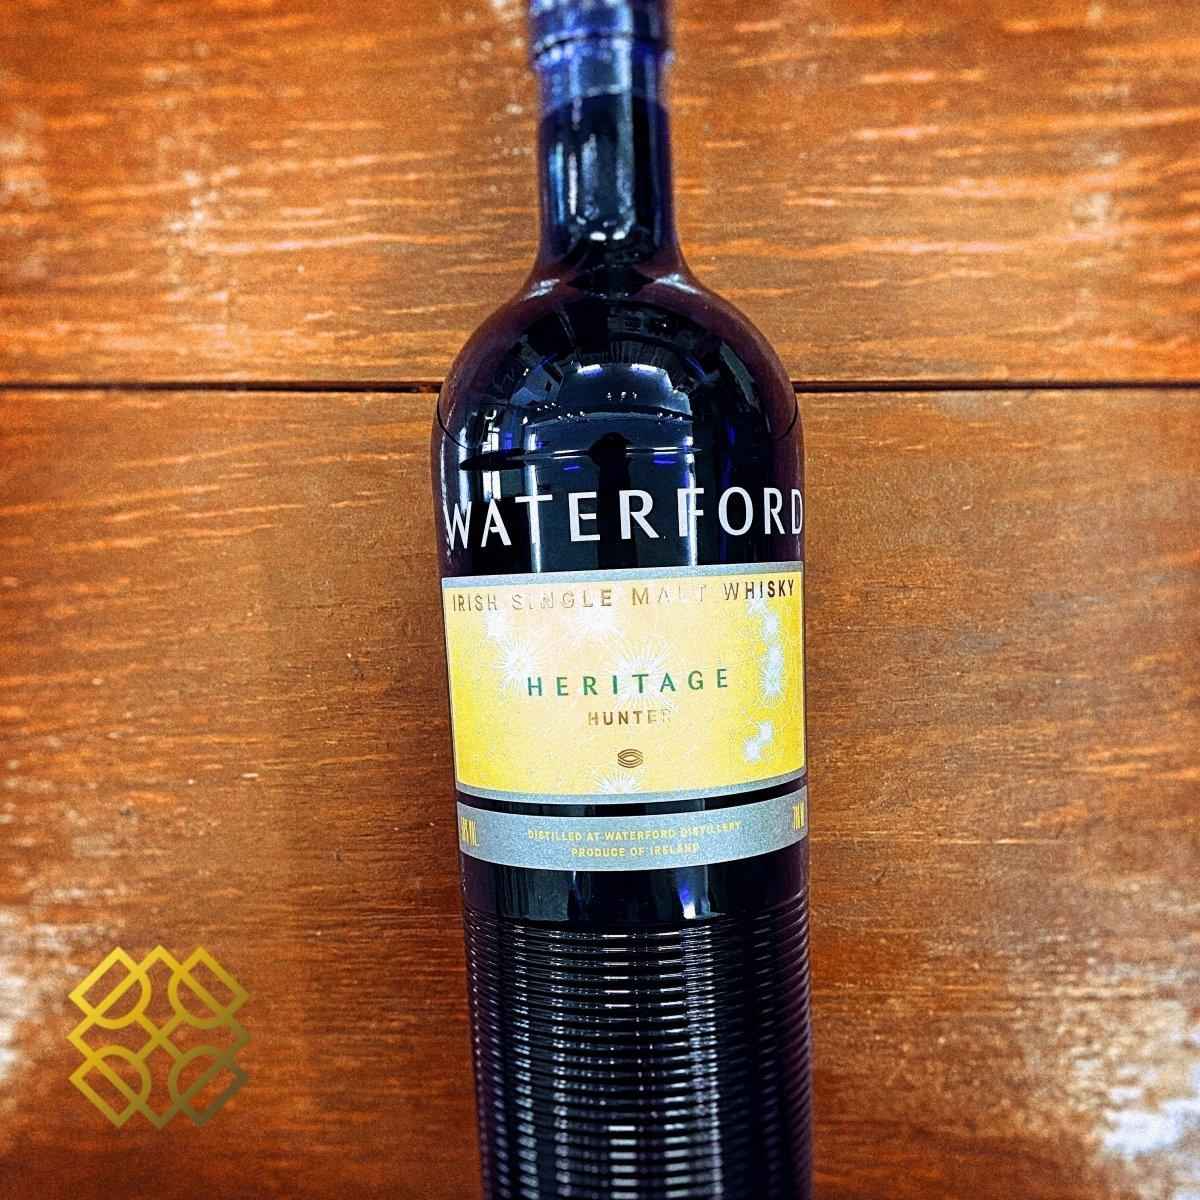 Waterford - Heritage Hunter 1.1, 50% - Waterford Whisky